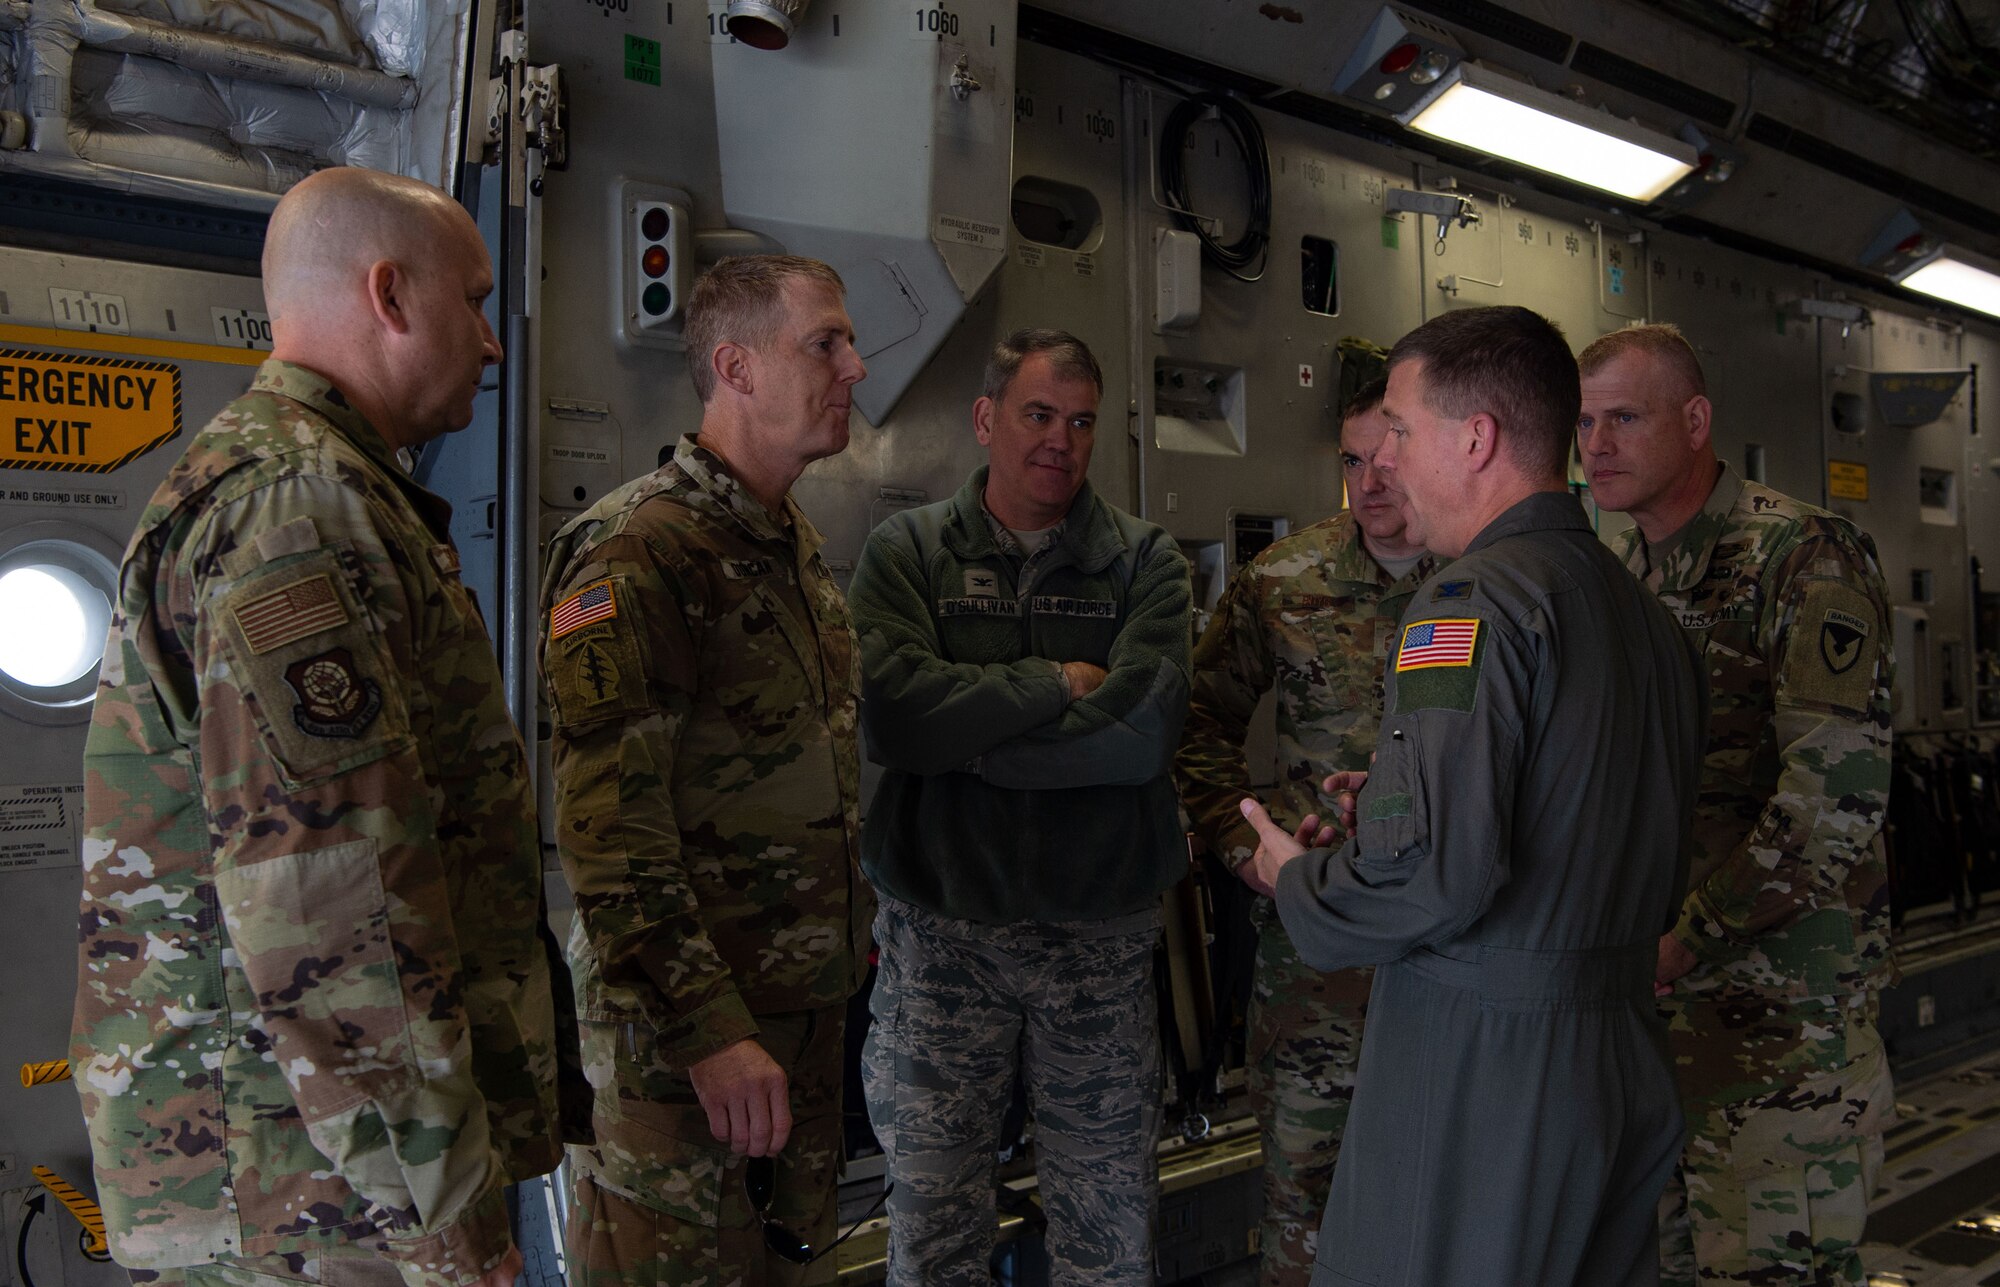 U.S. Air Force Col. Scovill Currin (front right), 62nd Airlift Wing commander, talks to Joint Base Lewis-McChord (JBLM) and Team McChord leaders about interoperability between the Air Force and Army inside a C-17 Globemaster III at Moses Lake Municipal Airport, Wash., Oct. 1, 2019. Soldiers from the 51st Expeditionary Signal Battalion, 35th Signal Brigade, tested their long-range communication equipment from Moses Lake to JBLM for a mobility movement exercise. (U.S. Air Force photo by Senior Airman Tryphena Mayhugh)